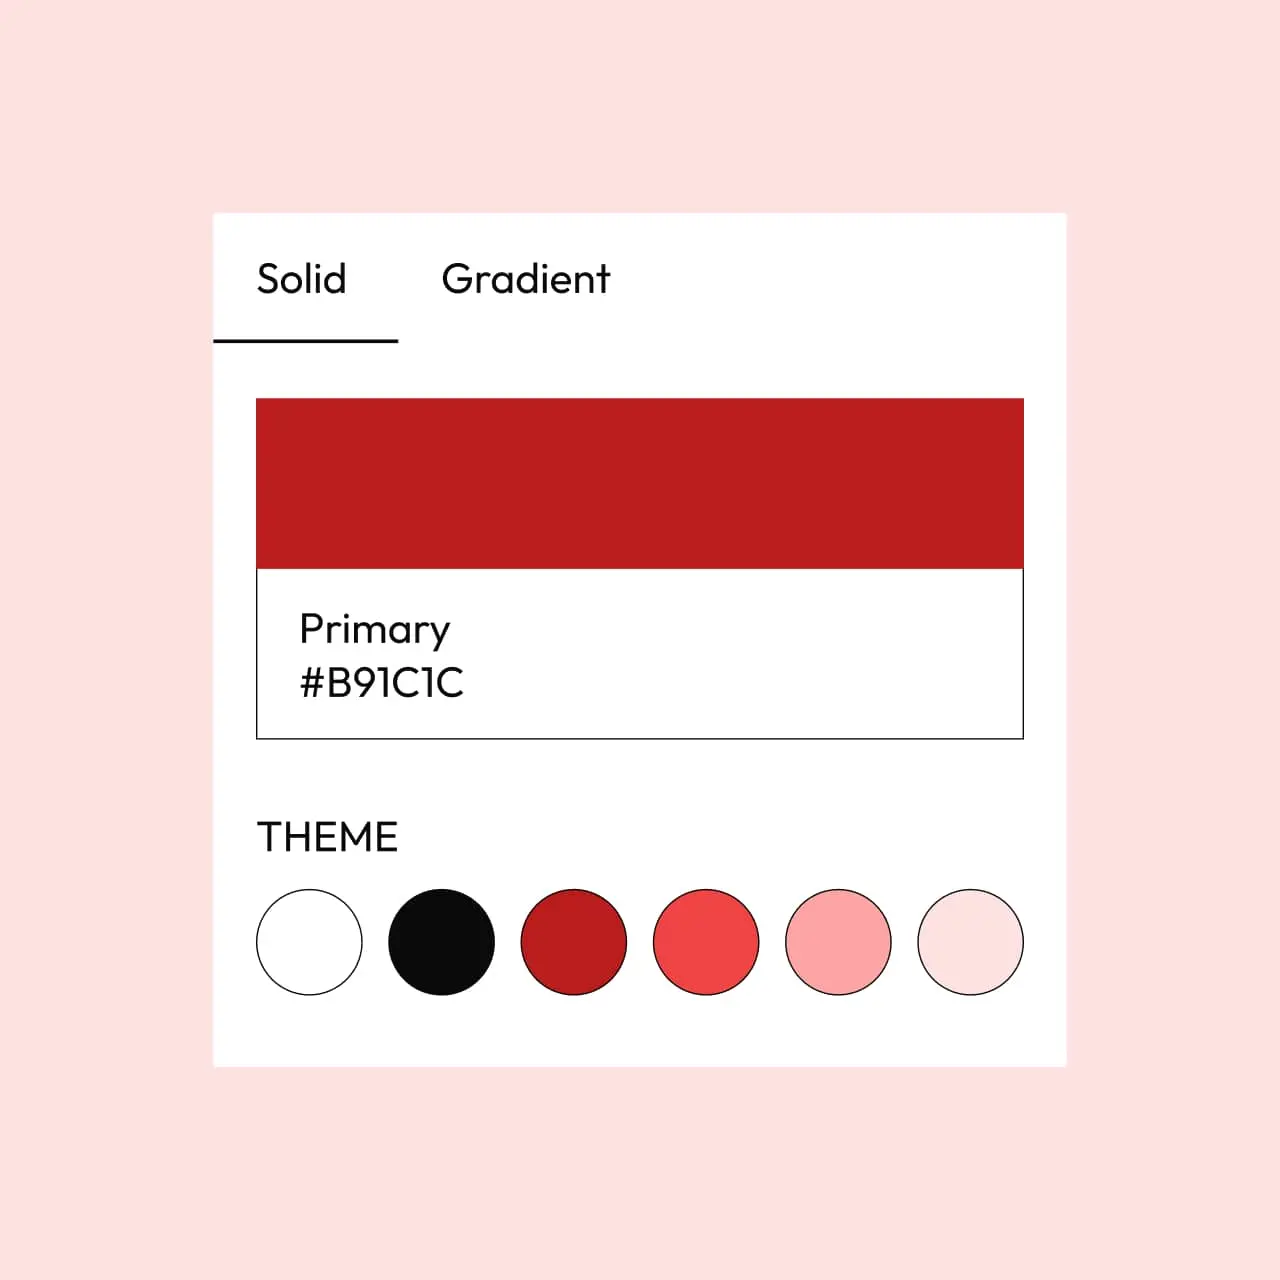 Powder WordPress theme Red style variation color palette